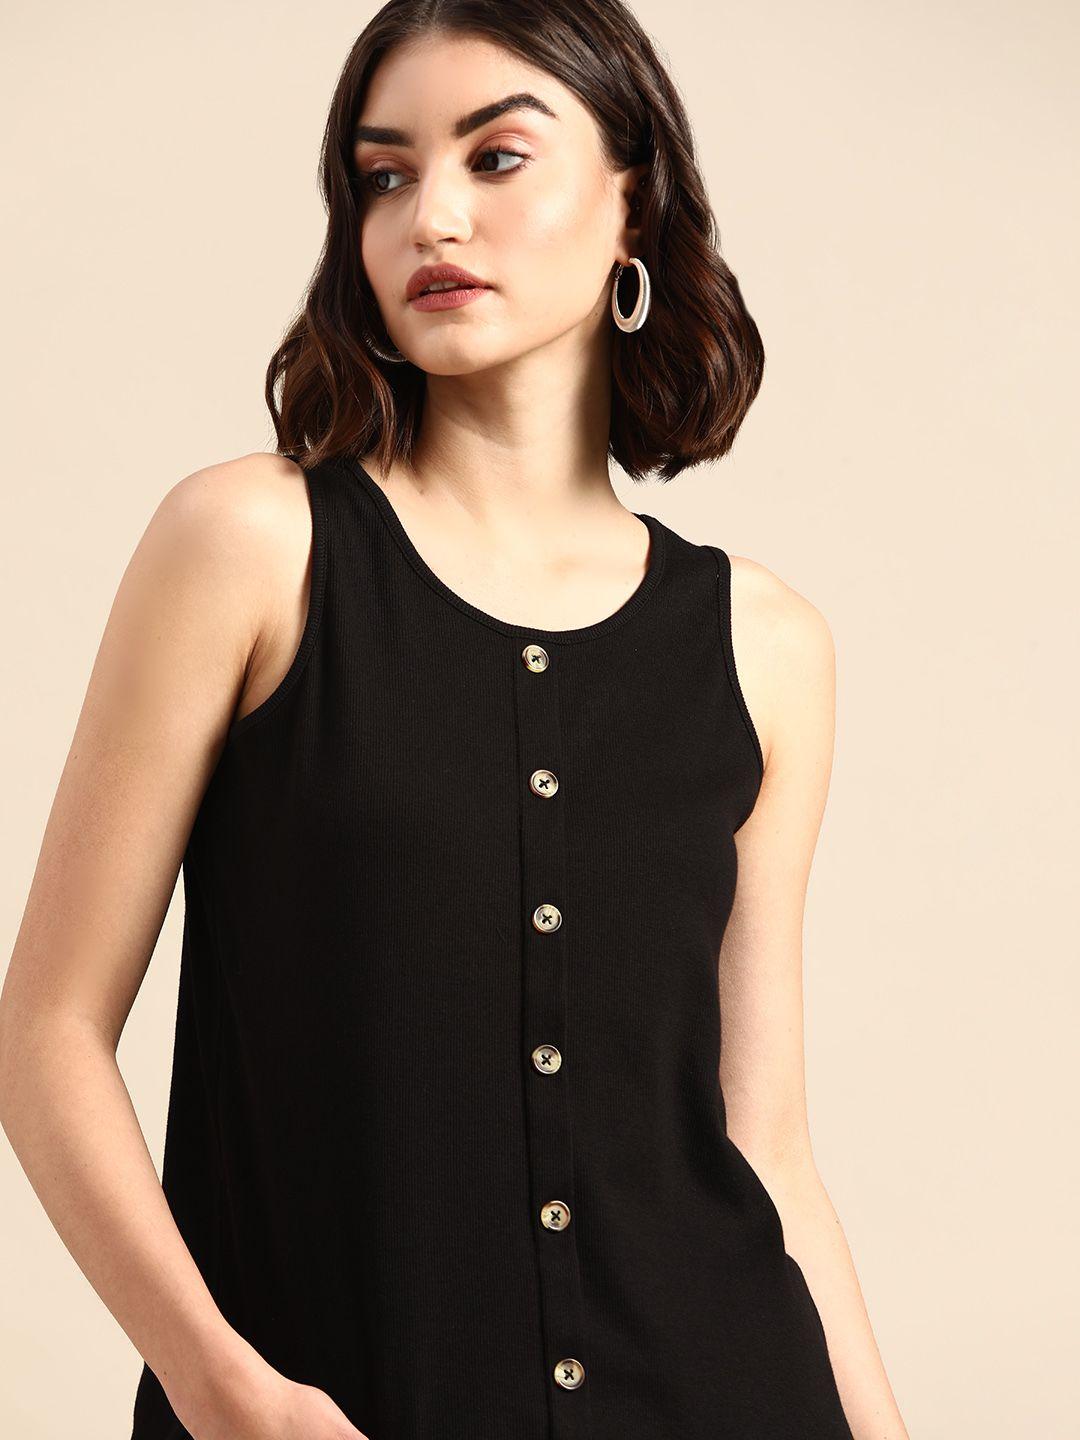 all-about-you-women-black-solid-top